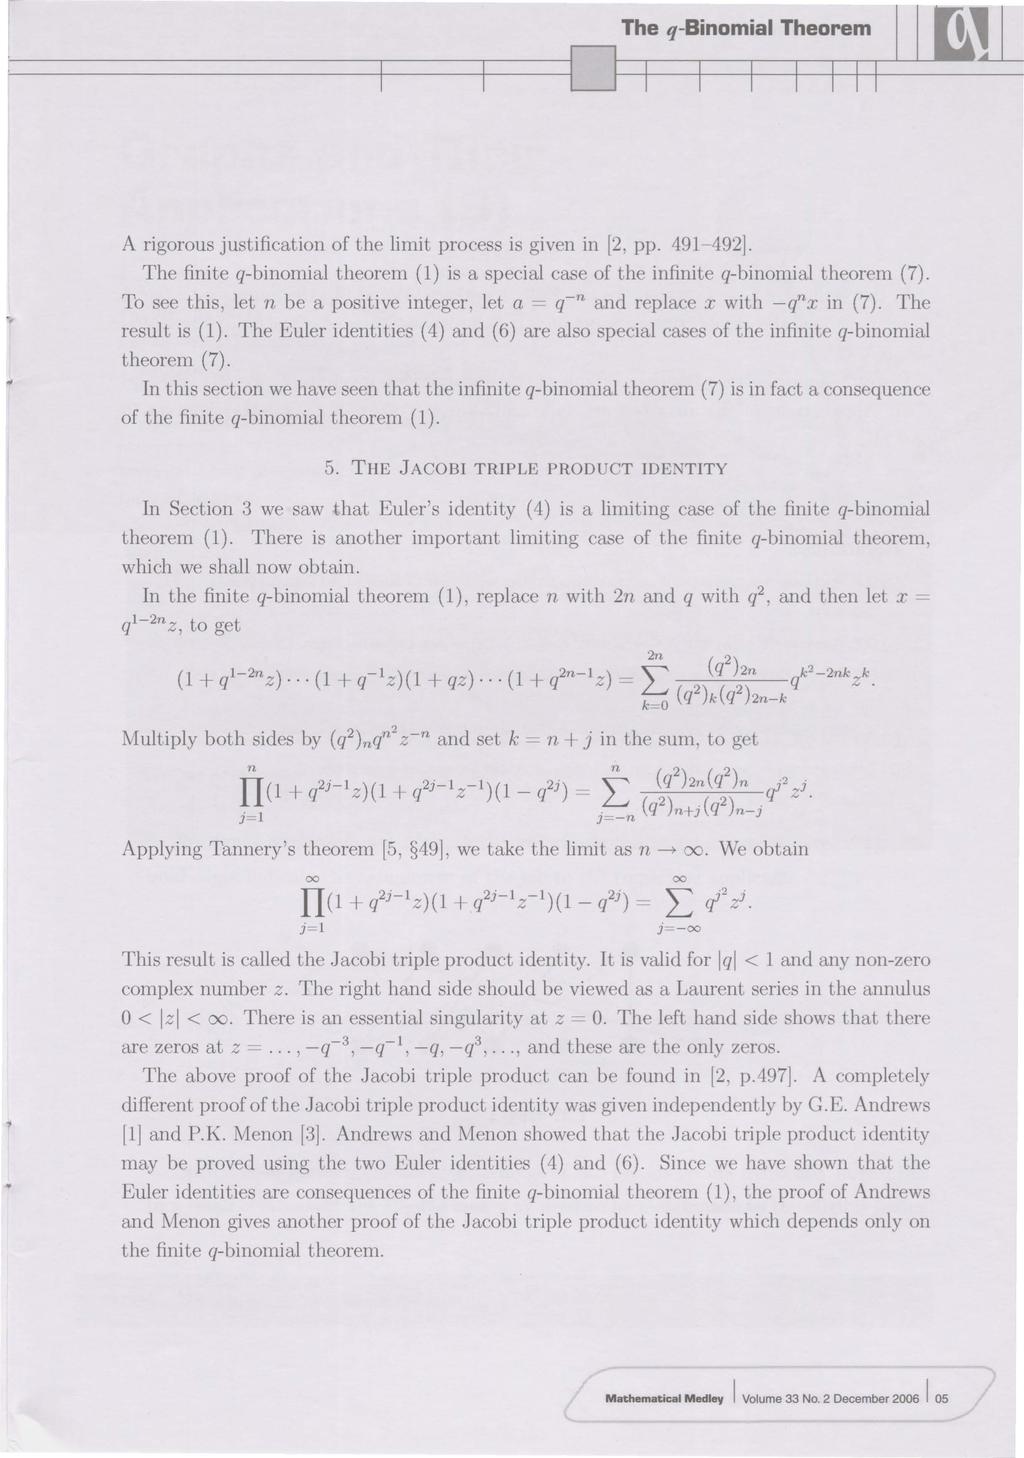 The q-biomial Theorem A rigorous justificatio of the limit process is give i [2, pp. 491-492]. The fiite q-biomial theorem (1) is a special case of the ifiite q-biomial theorem (7).